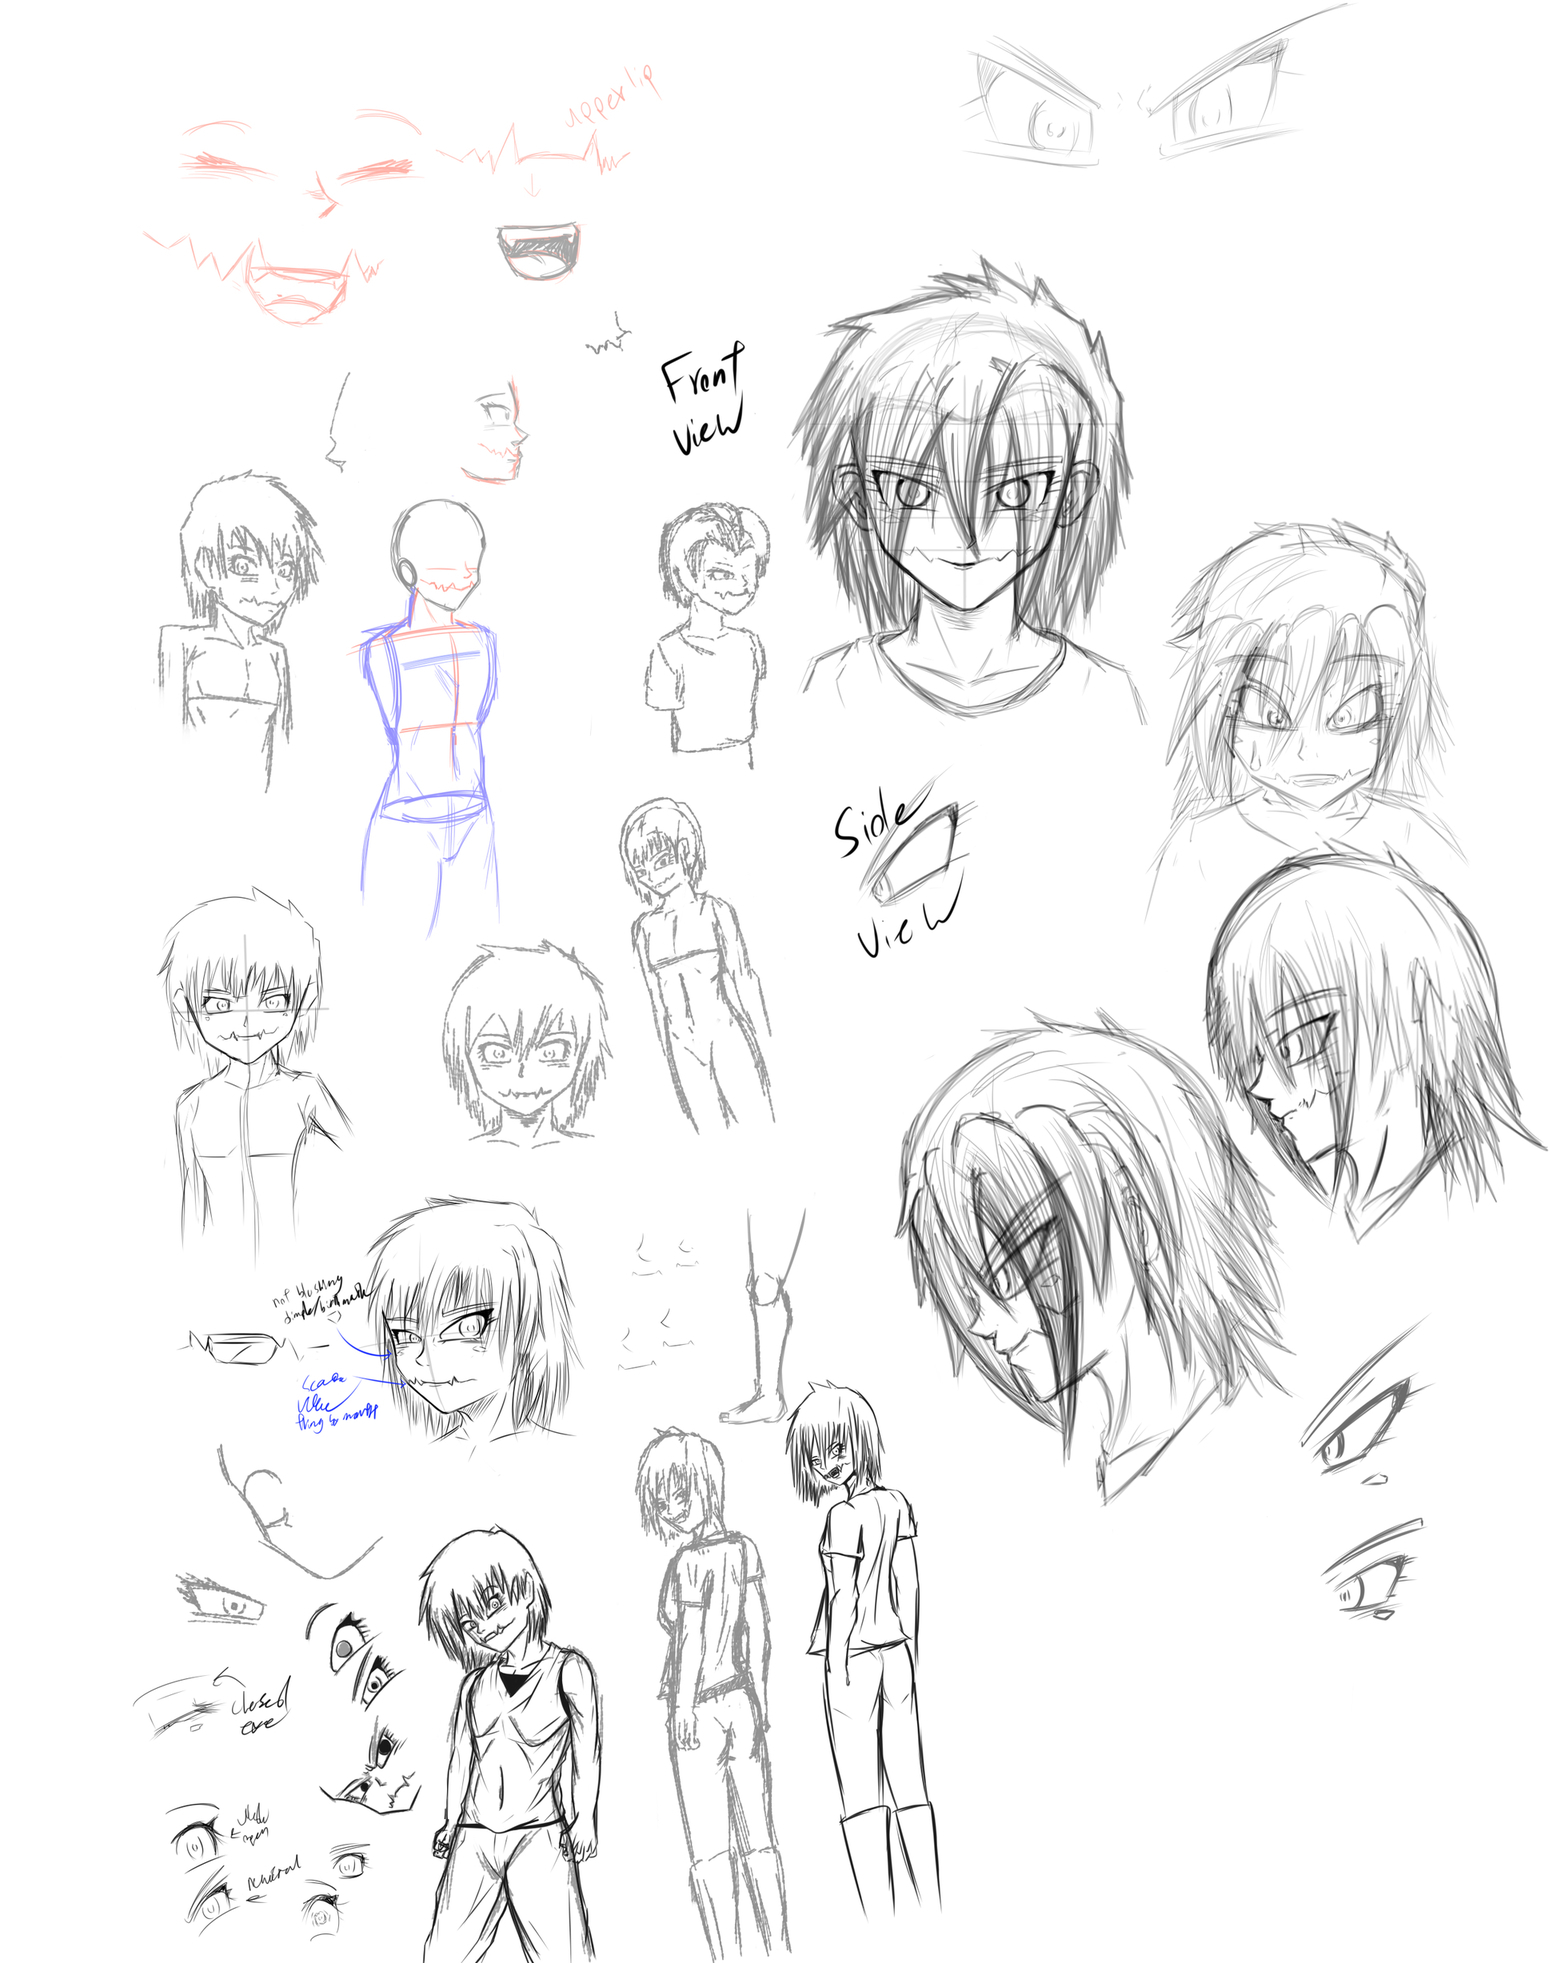 Monochrome character reference sheet of an anime girl with short messy hair